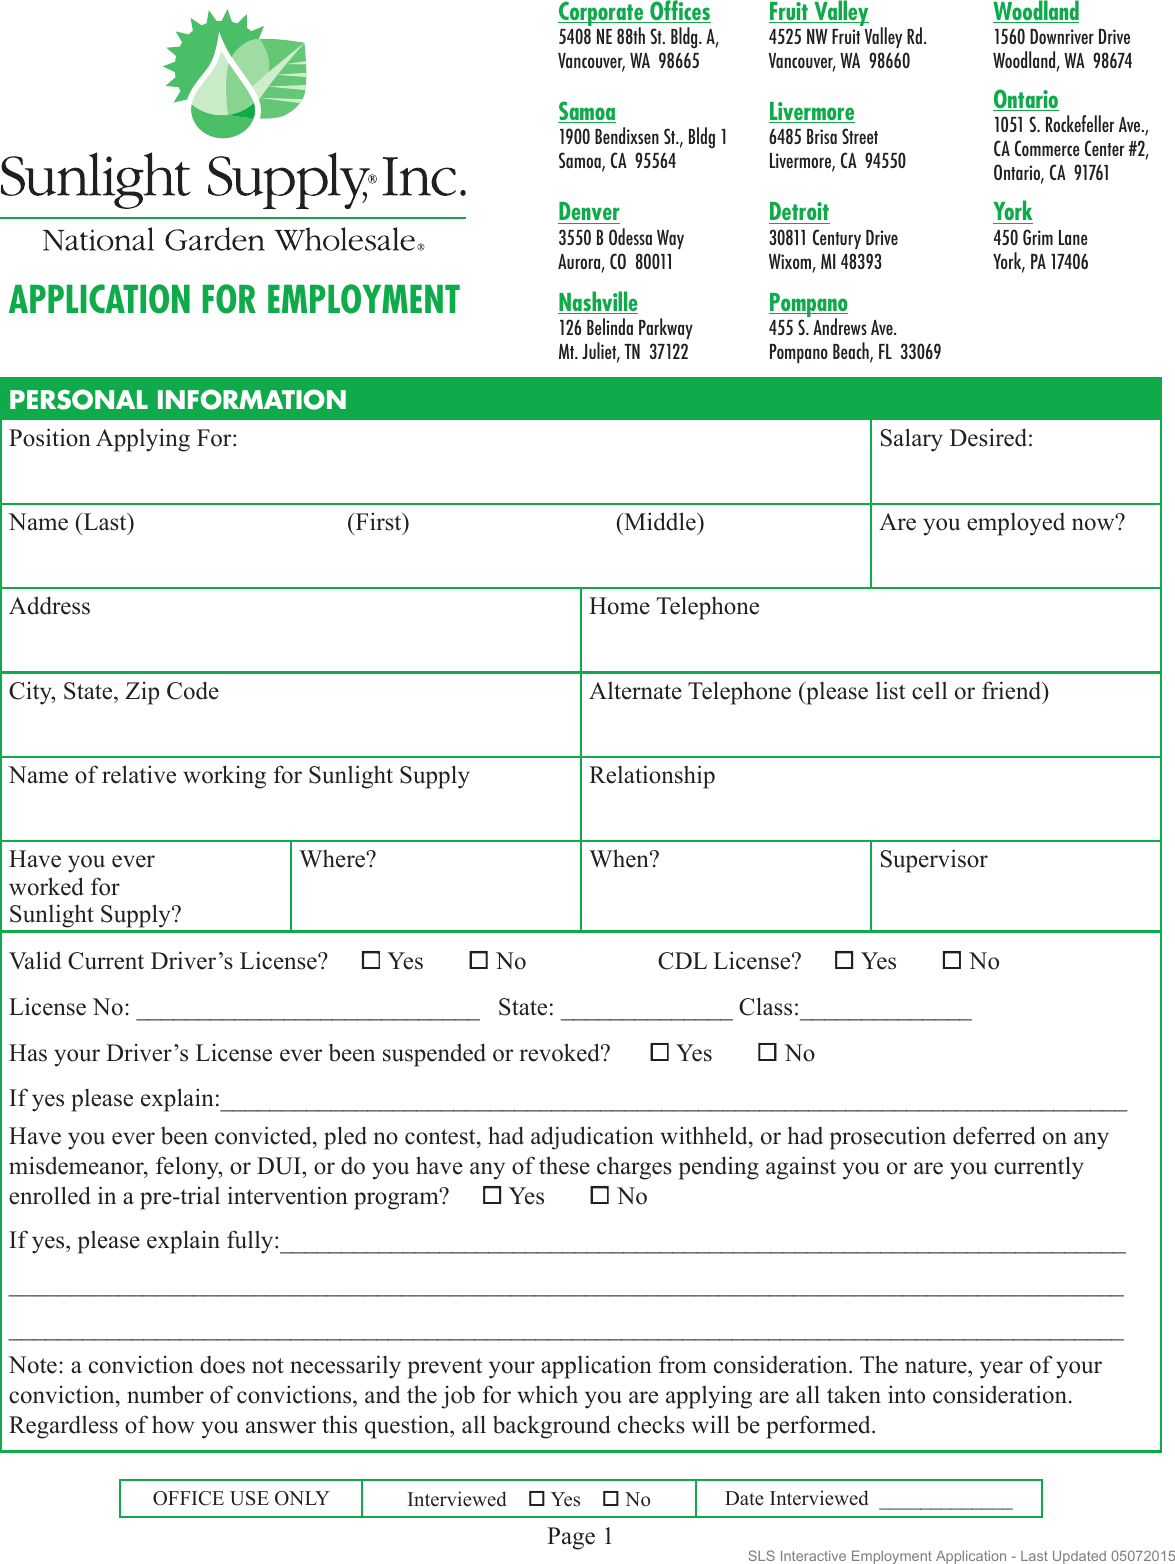 Page 1 of 4 - Sunlight Supply-Interactive-Employment-Application